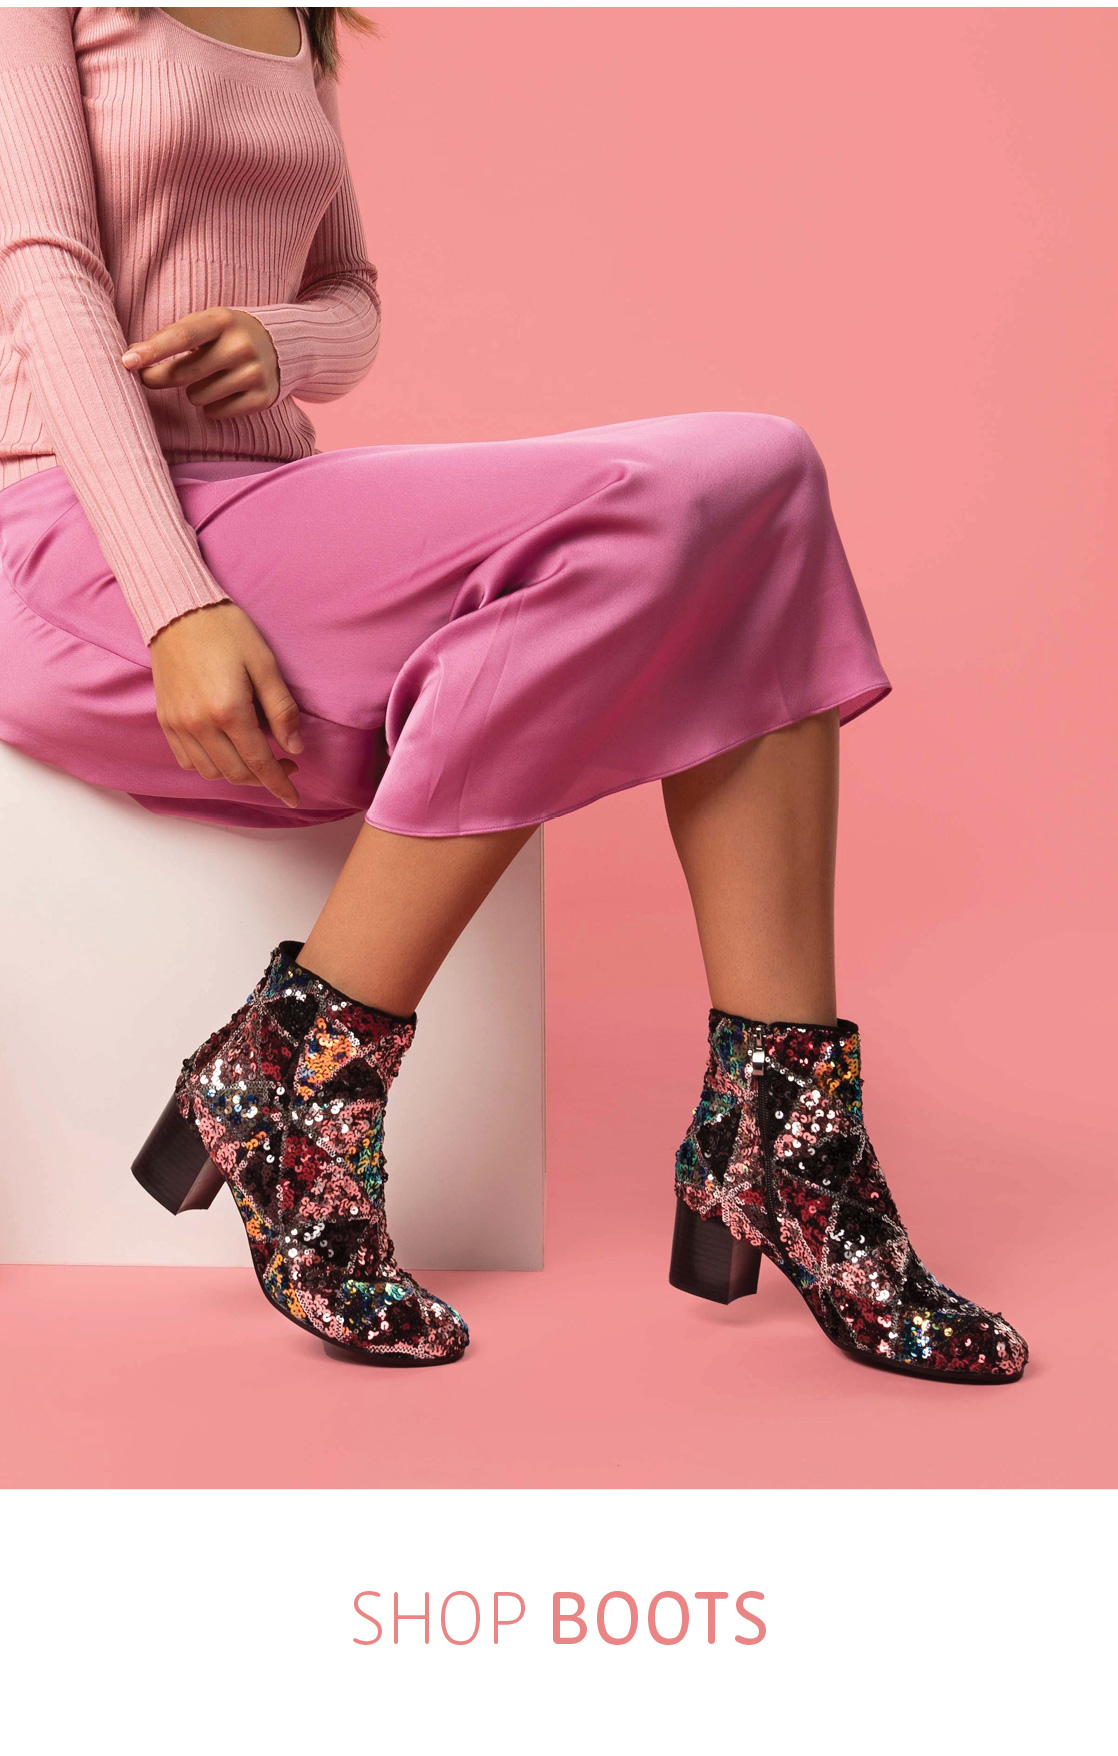 I Love Billy Shoes Online - Check out the Latest Boots and Heels